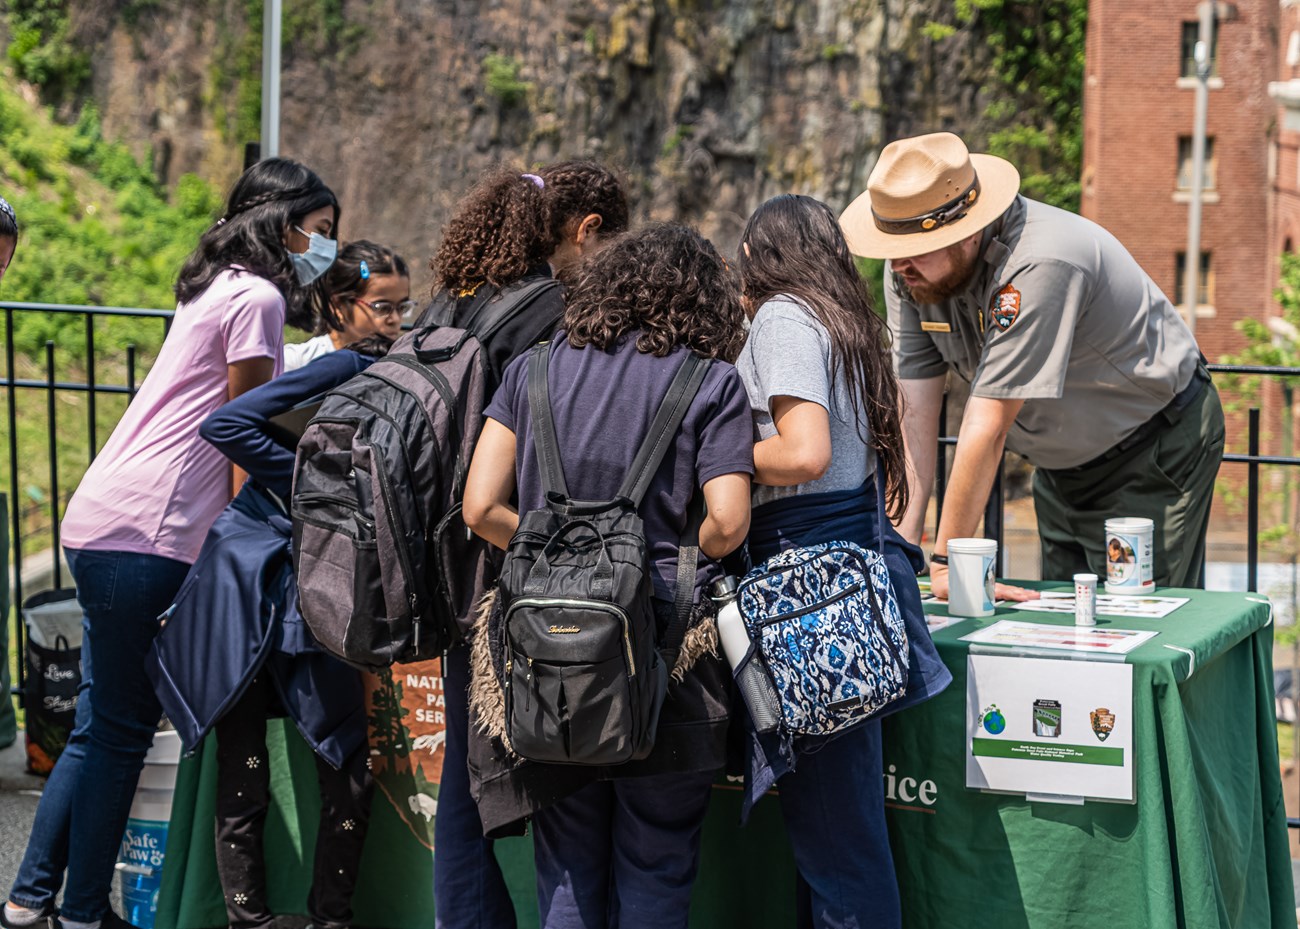 A park ranger leans over an activity table, working with a crowd of young students